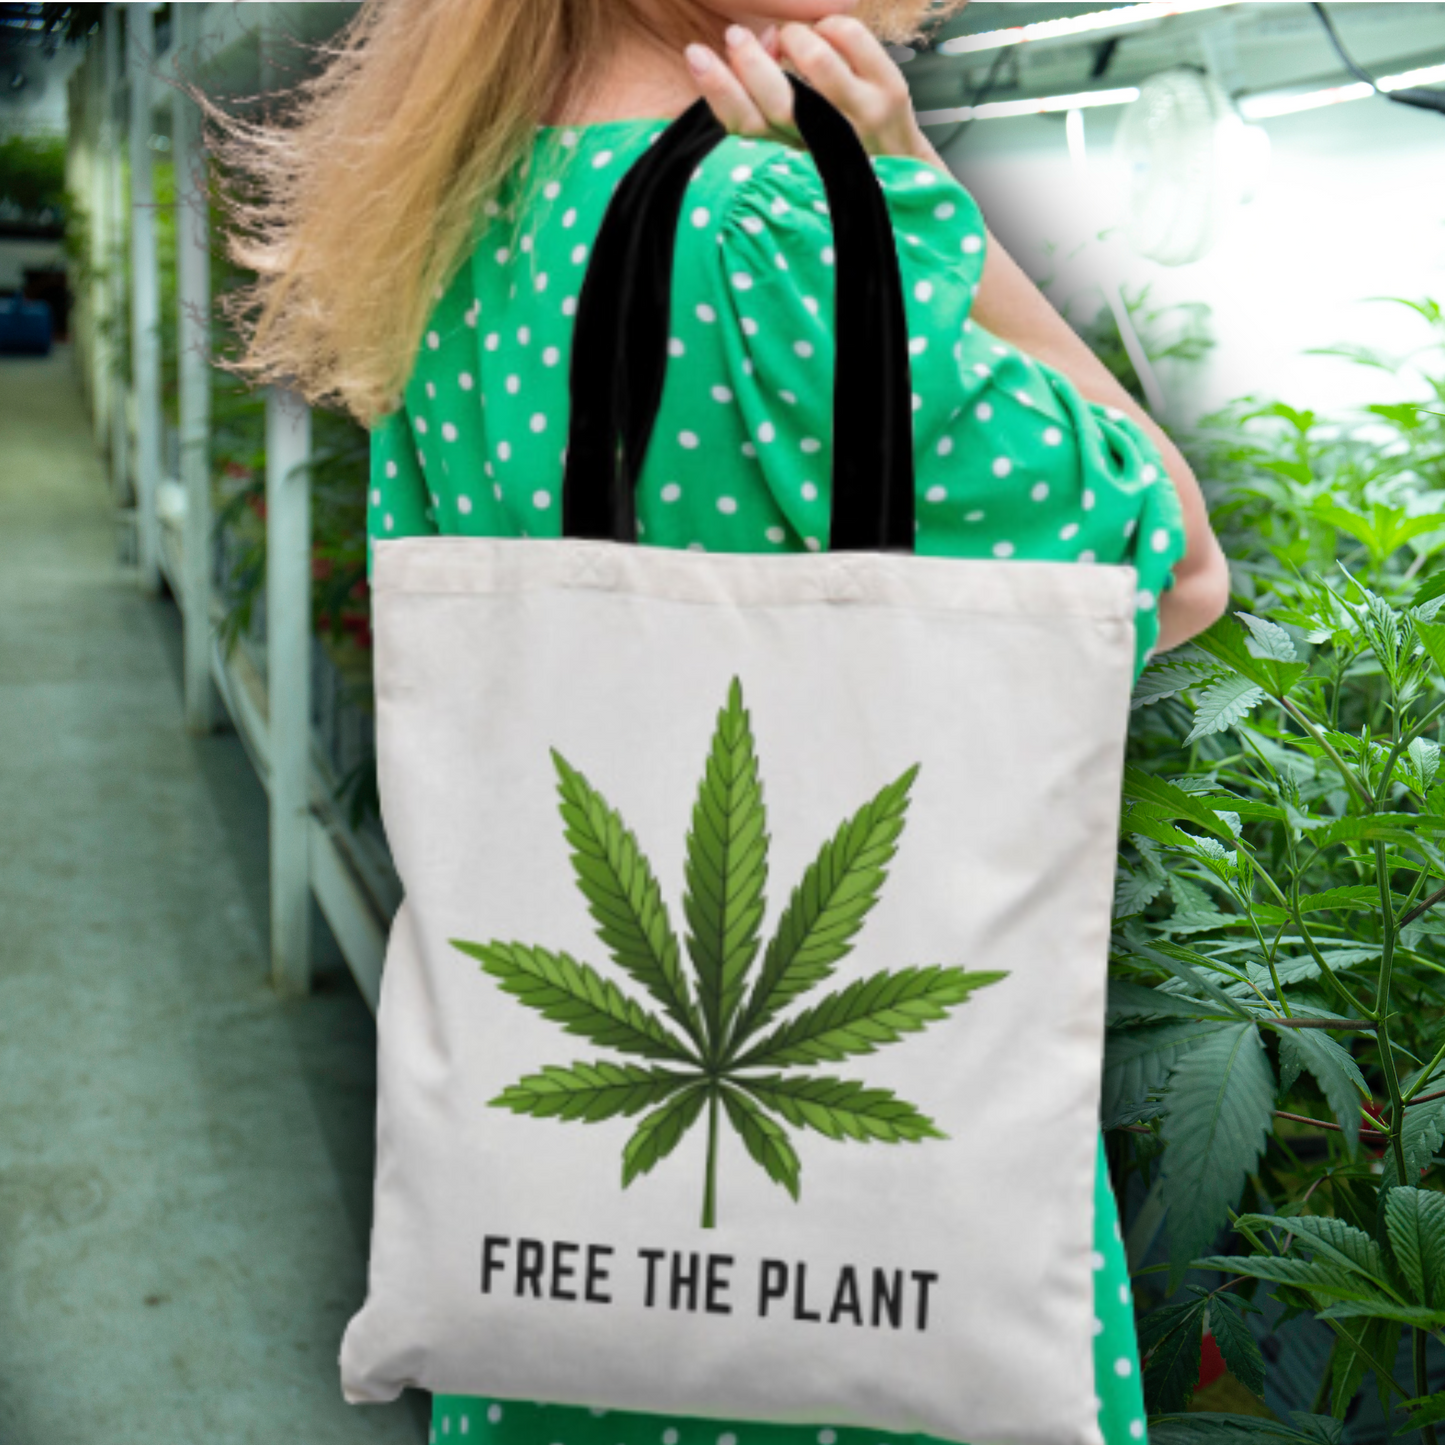 Free The Plant - Cannabis Leaf Advocacy Tote Bag | 100% Polyester, Three Sizes, Assembled in USA